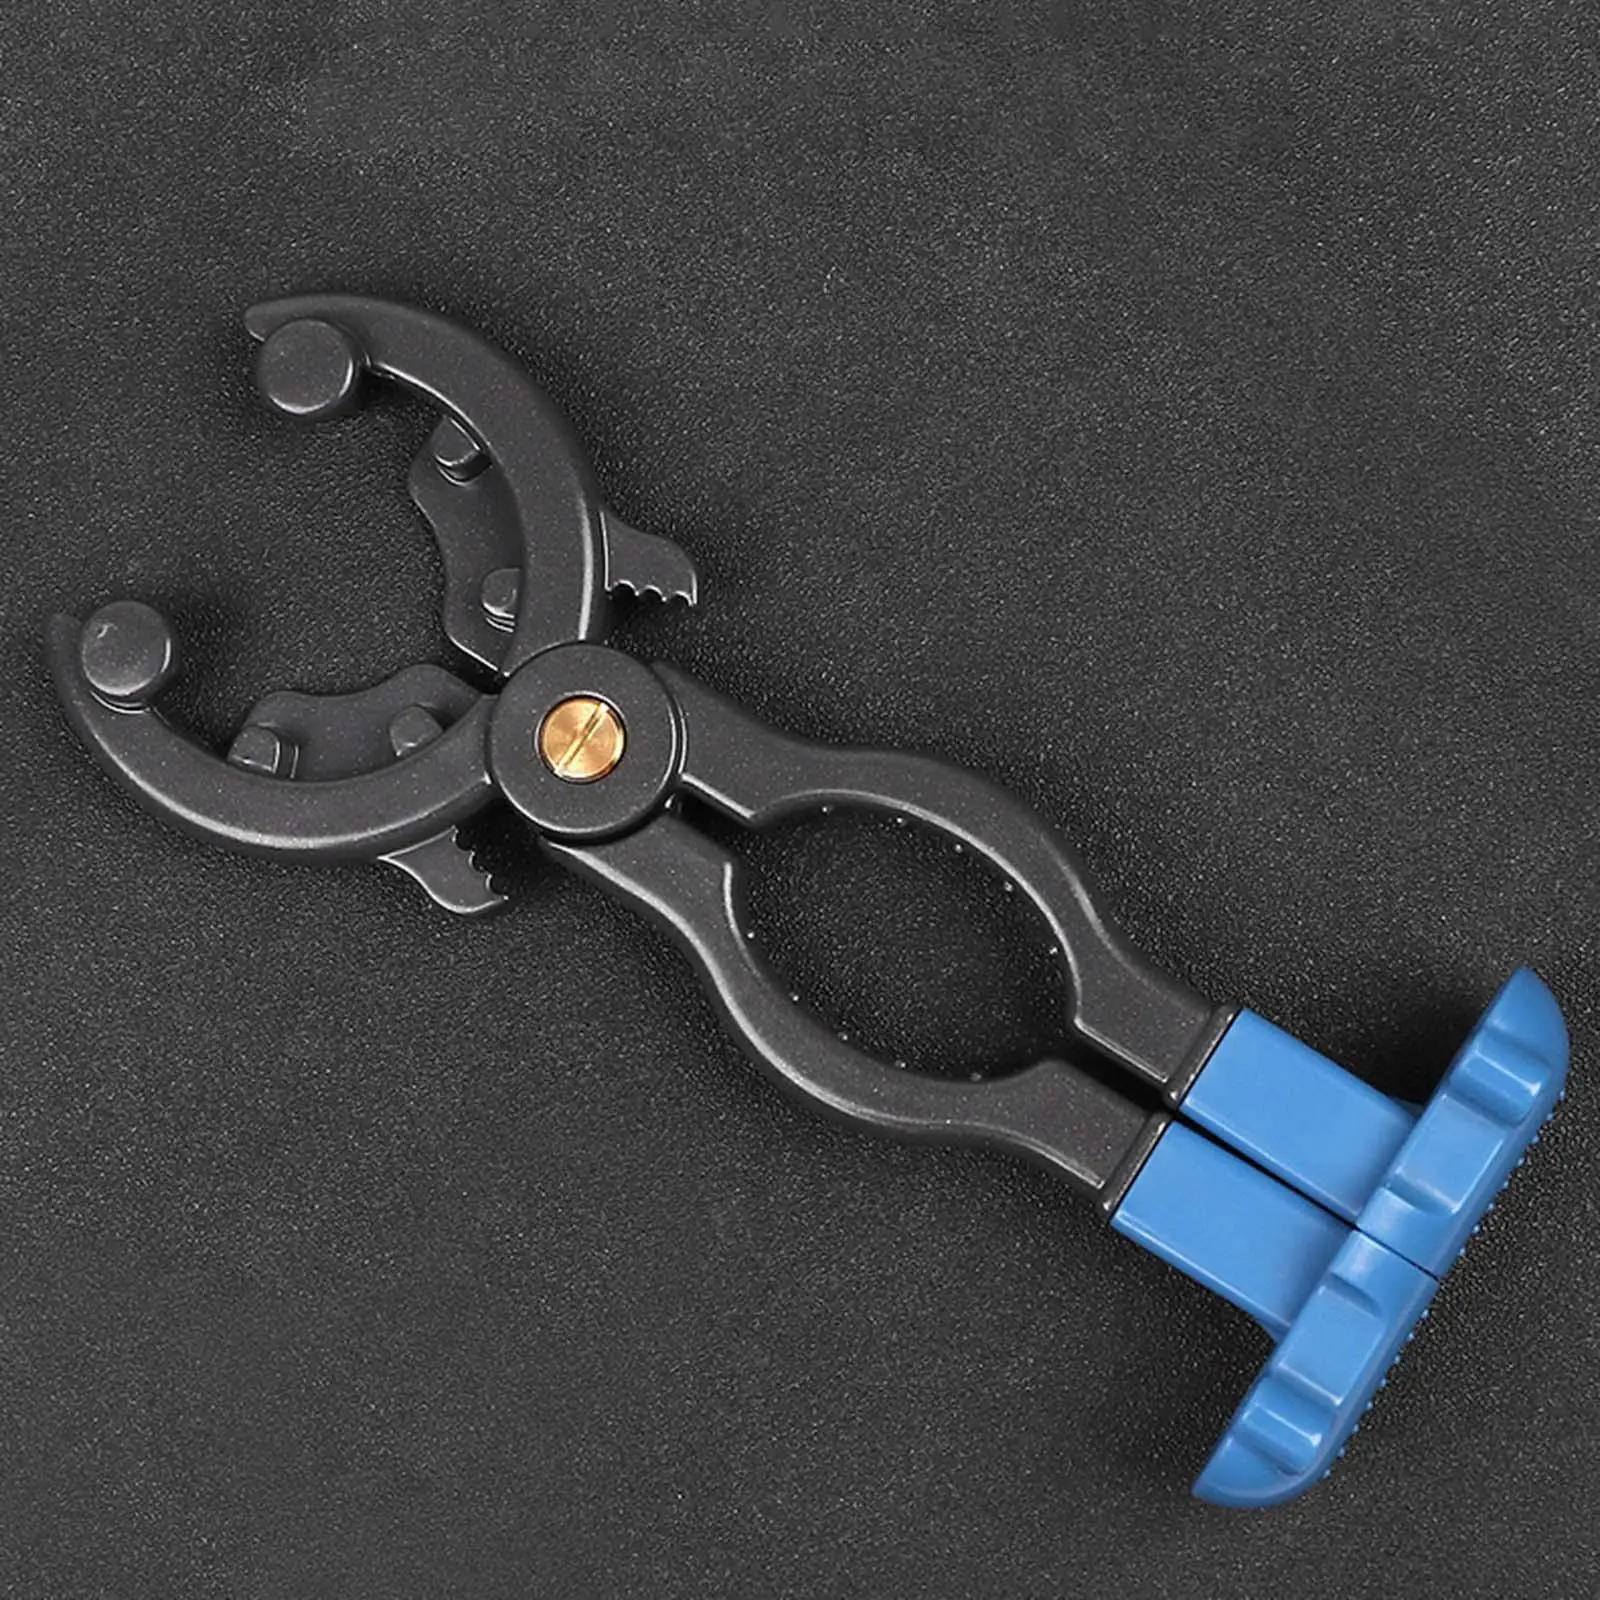 Gas Tank Pressure Reducing Valve Wrench Liquefied Gas Professional Hand Tools Repair Tool Can Opener Walnut Opener Bottle Opener